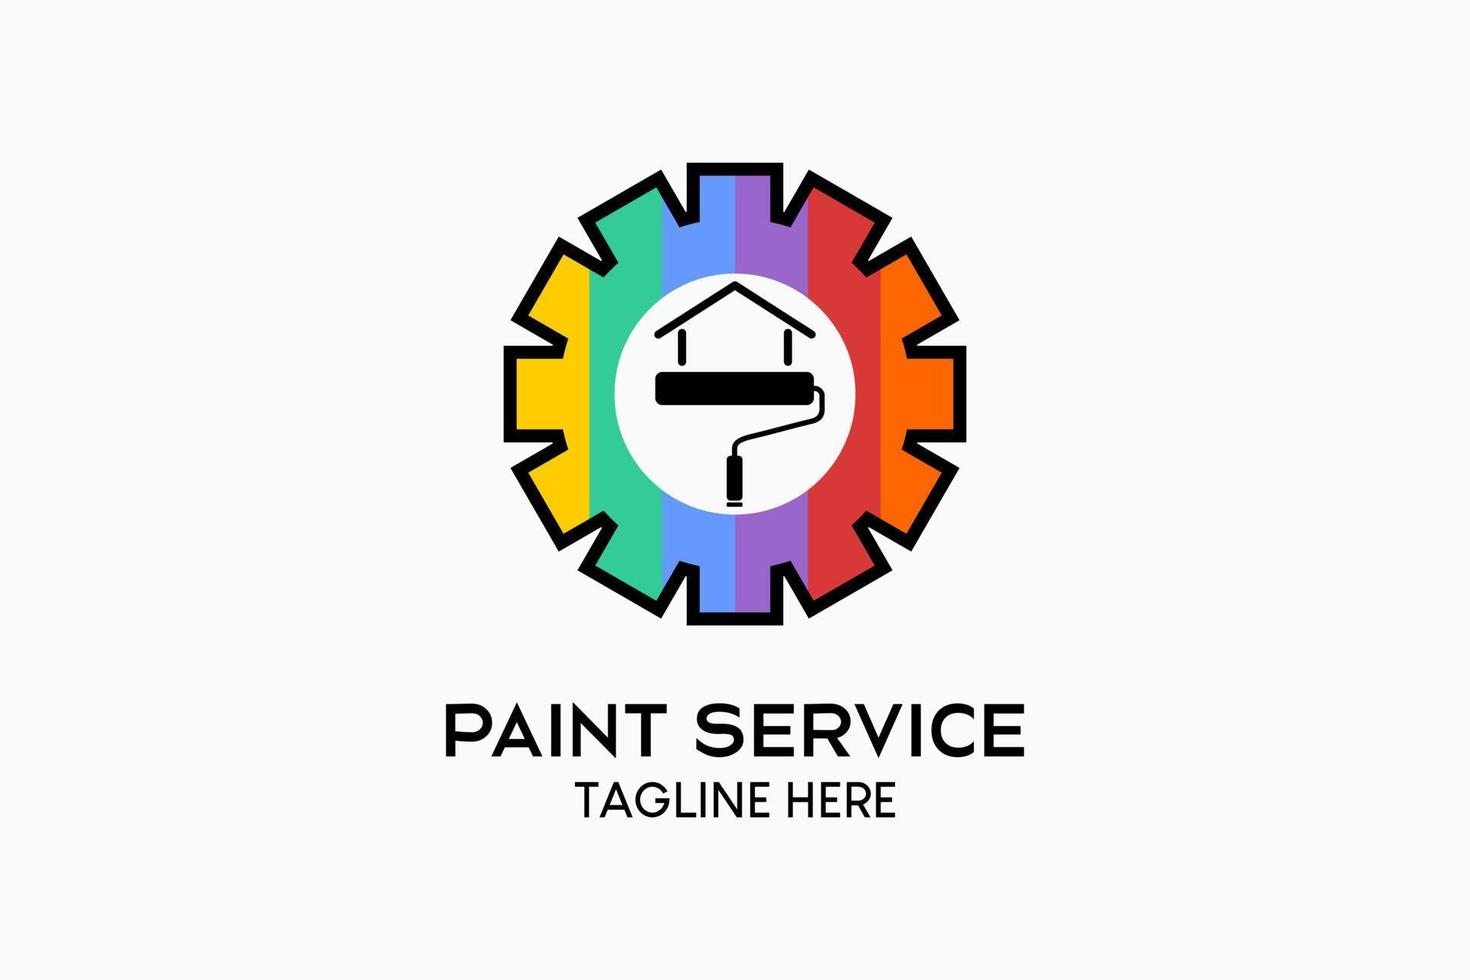 Wall paint logo design or house paint, paint roller silhouette with a house icon in a rainbow color concept in gear. Modern vector illustration